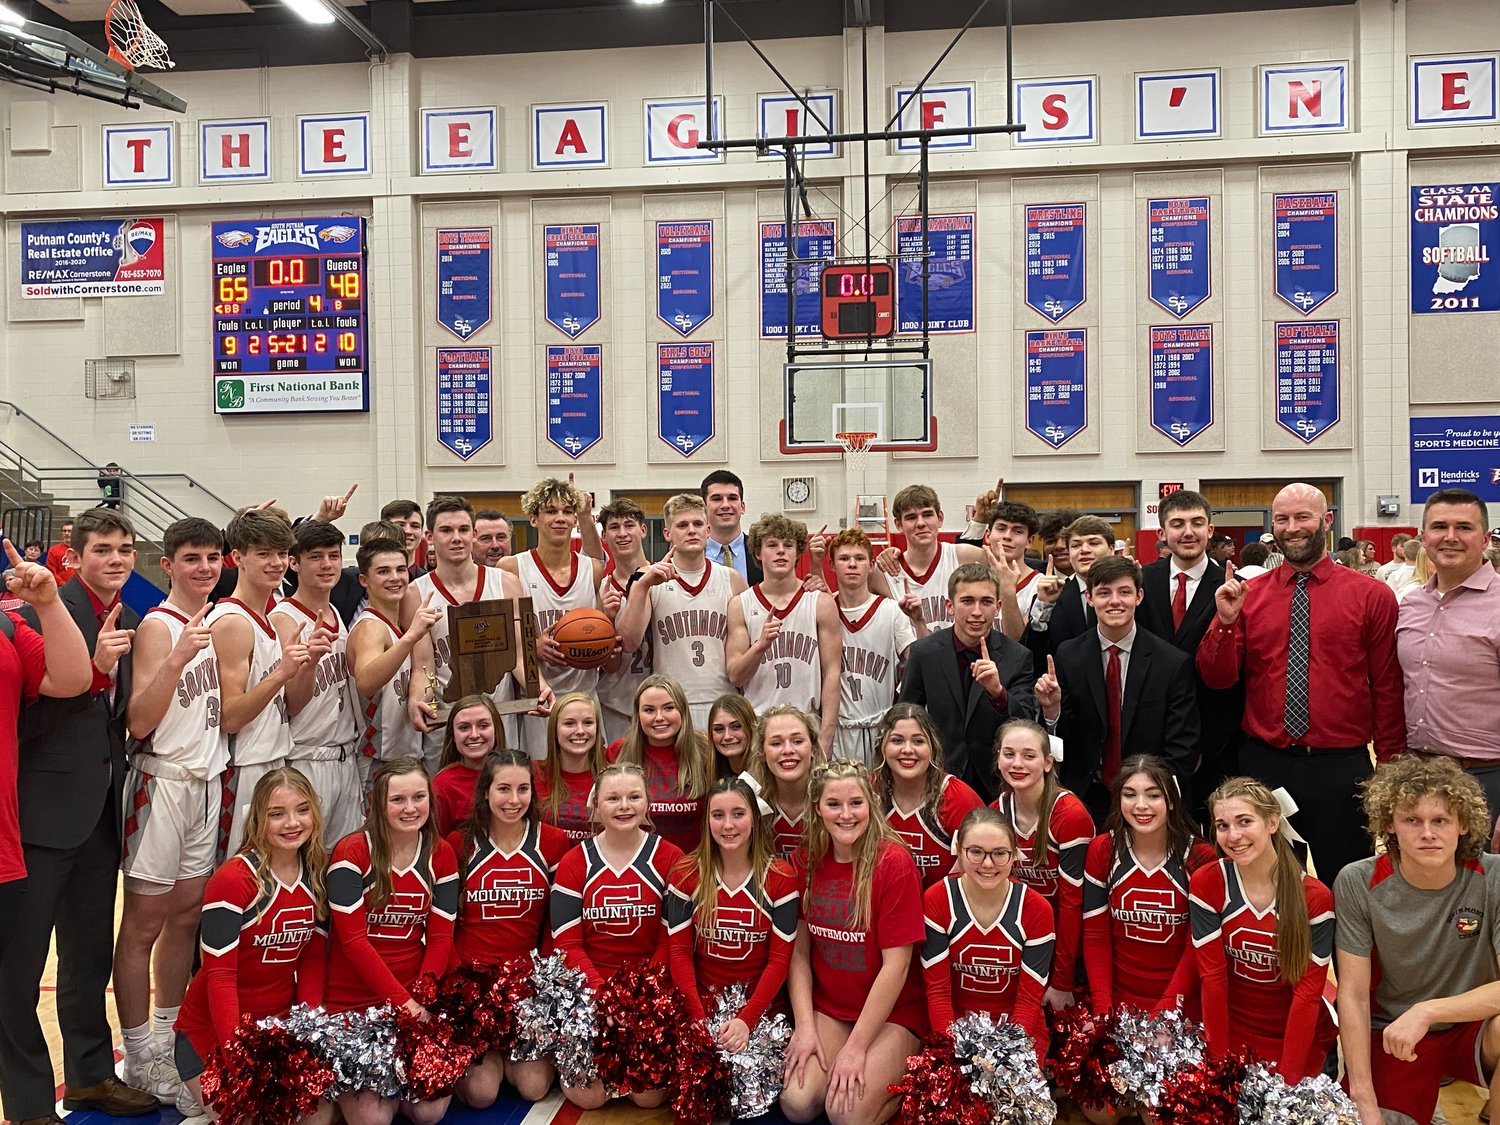 Southmont captured its first sectional title since 1994 with a 65-48 victory over Parke Heritage. The Mounties will move on to to next week’s Regional at Greenfield Central to take on Eastern Hancock.